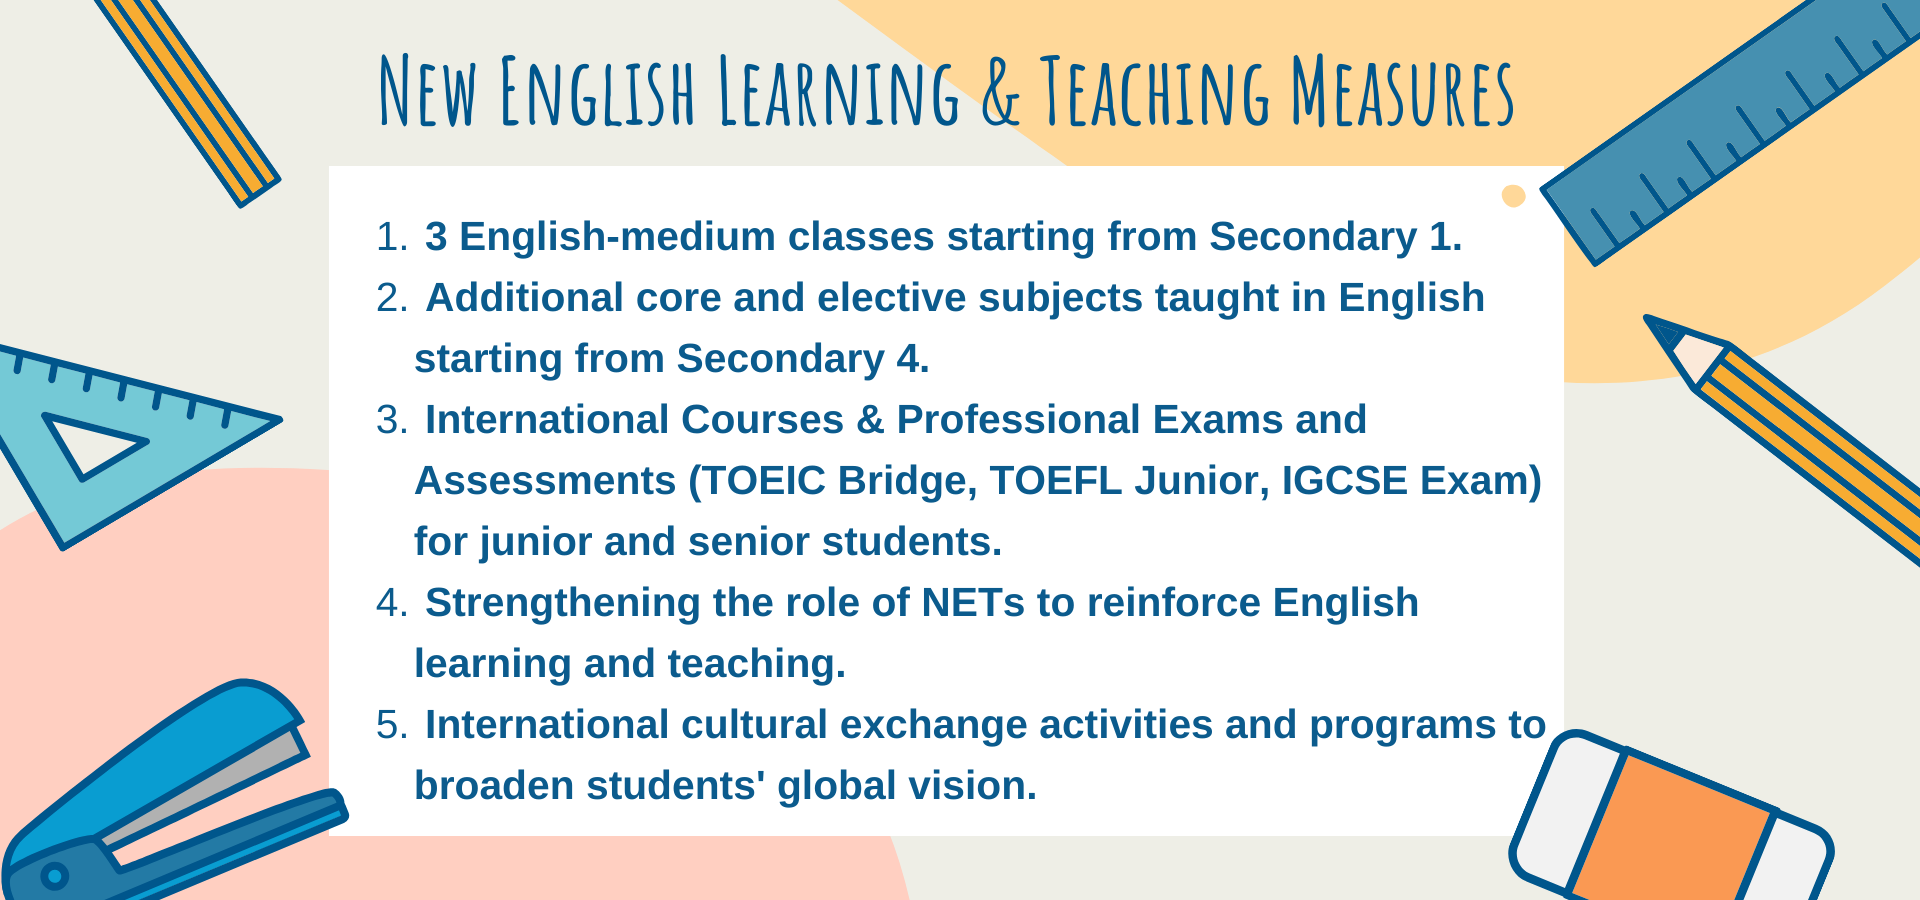 1_new_english_learning_teaching_measures